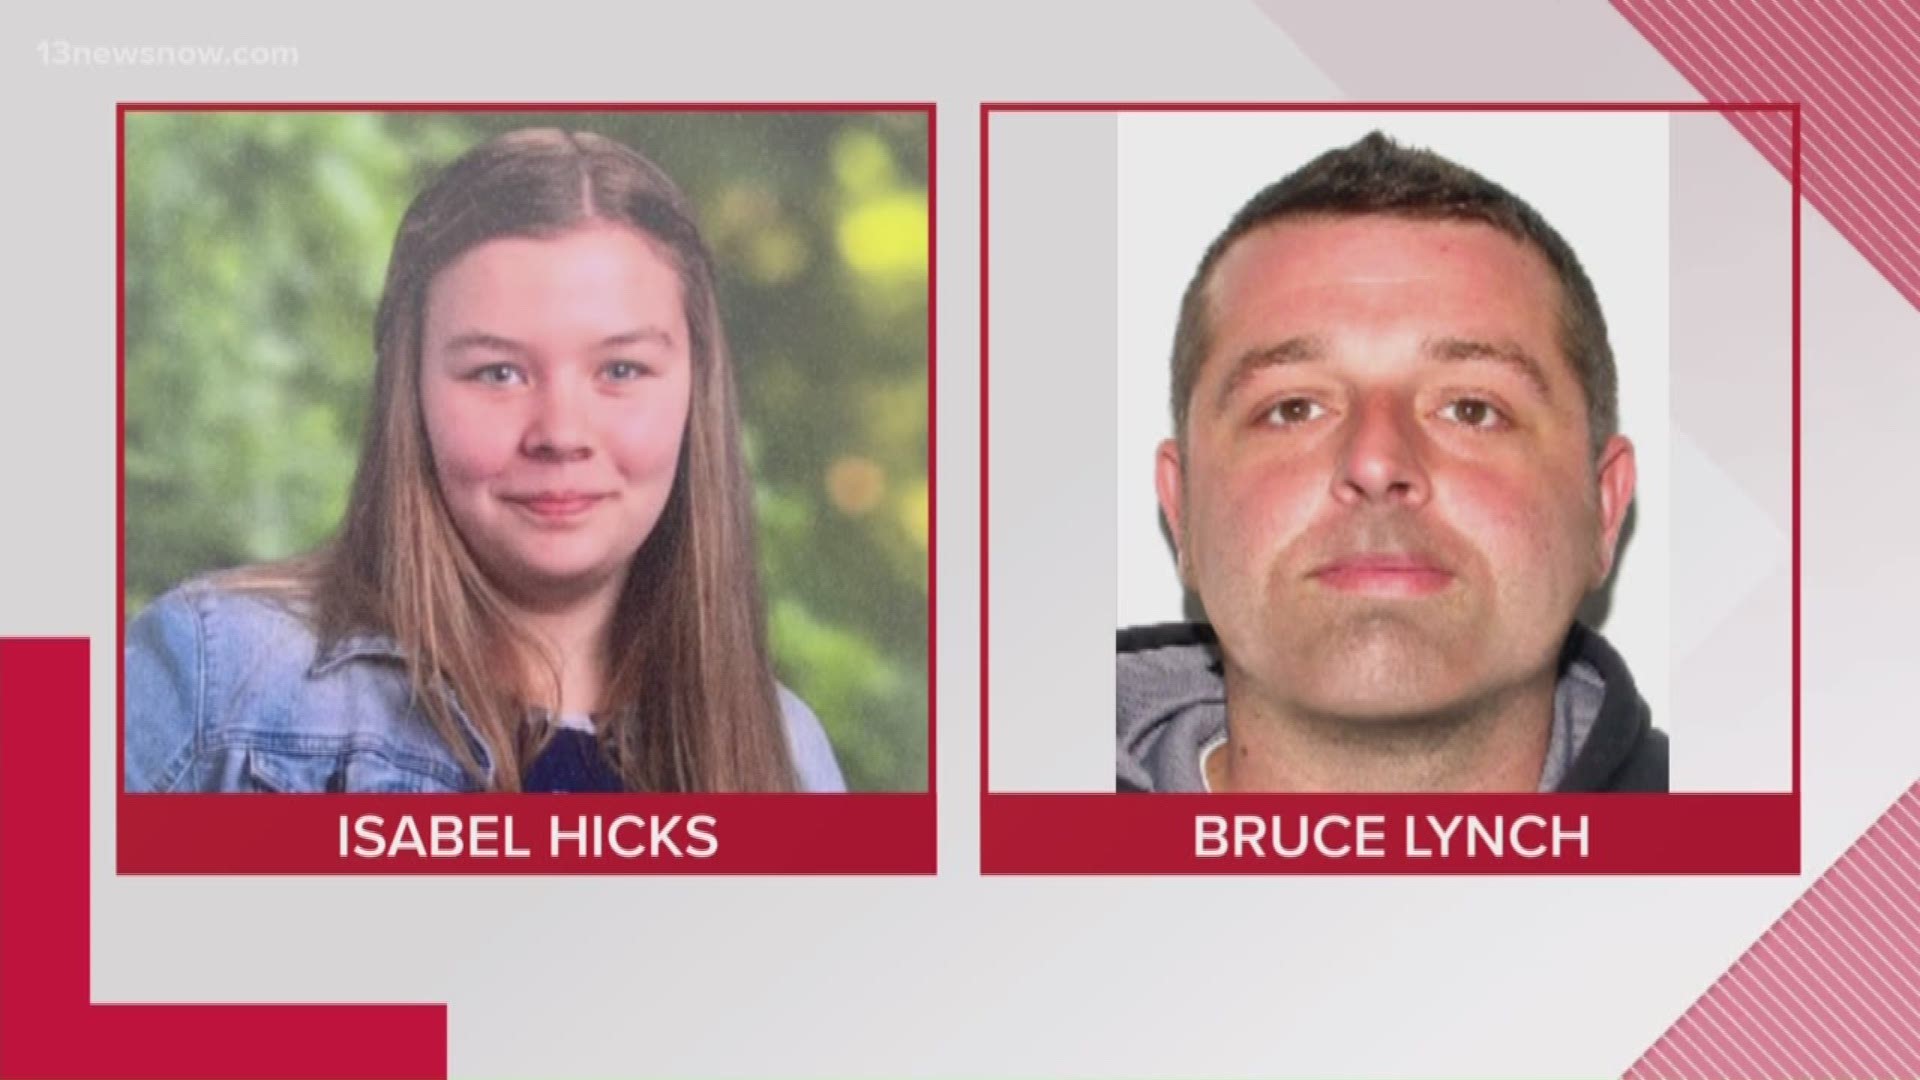 Isabel Hicks, 14, from Louisa County was found safe. Police said they arrested Bruce Lynch for the abduction.